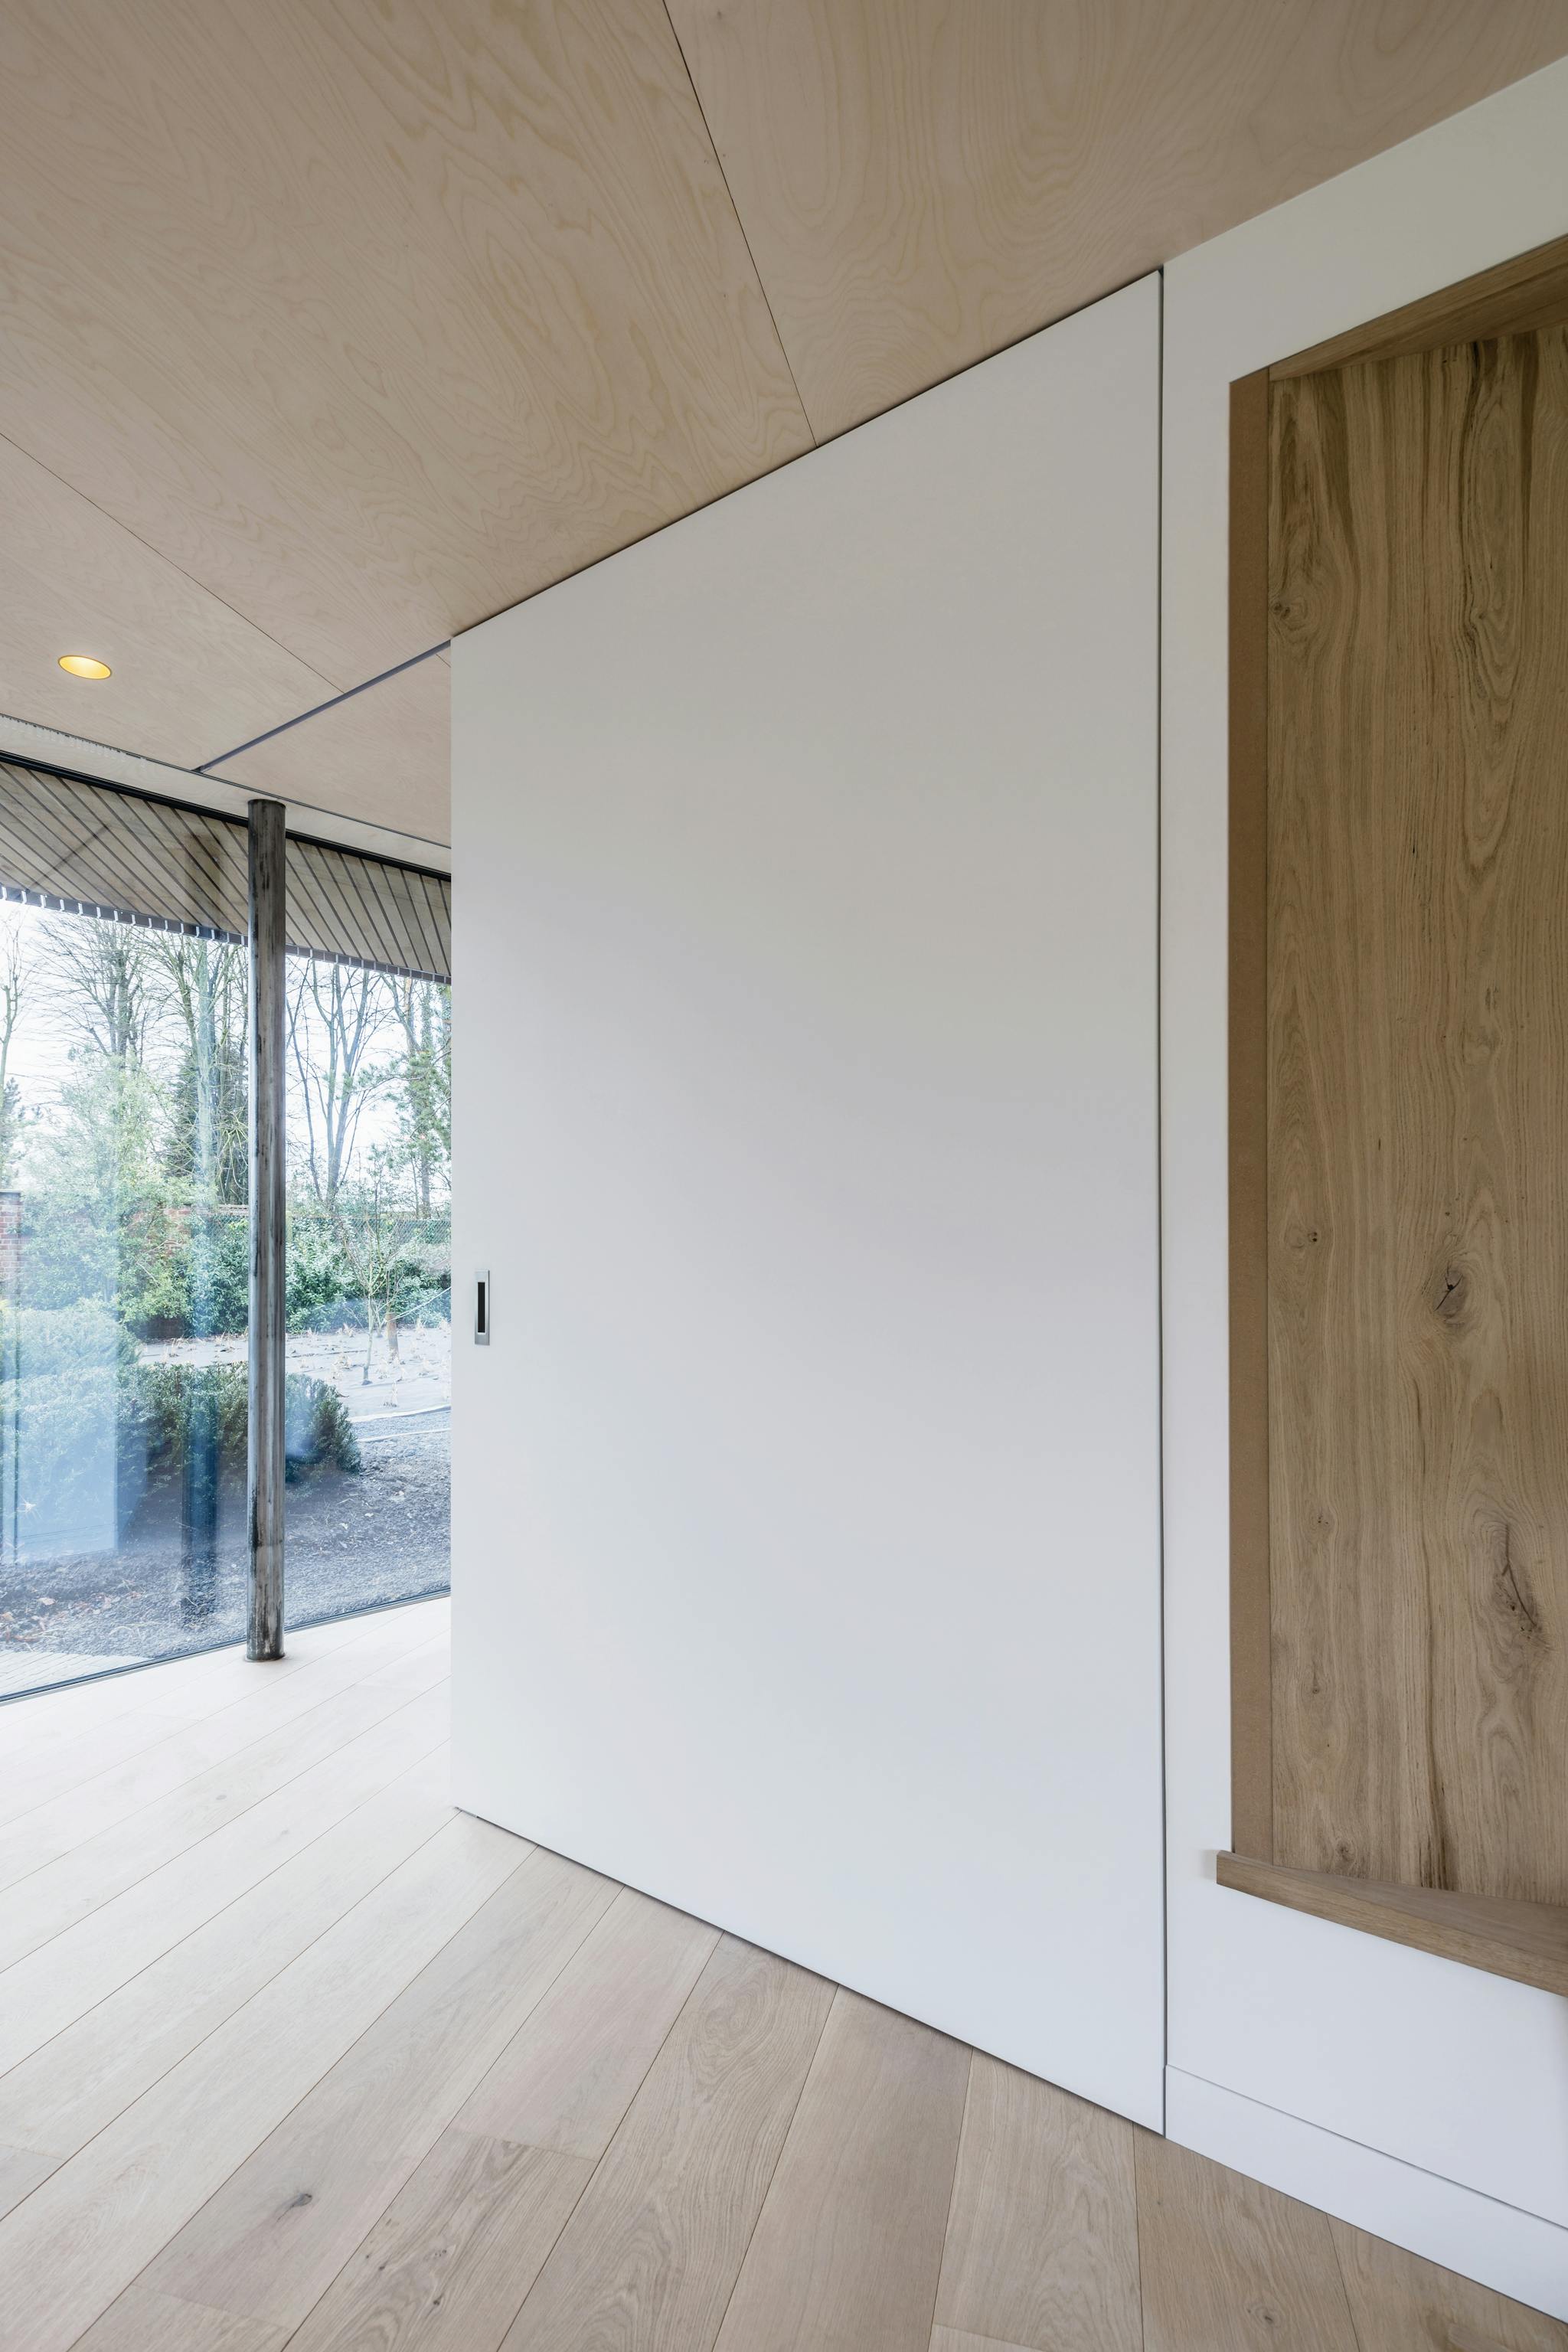 A huge white sliding door in a modern minimal interior with floor to ceiling glazing and wooden floor